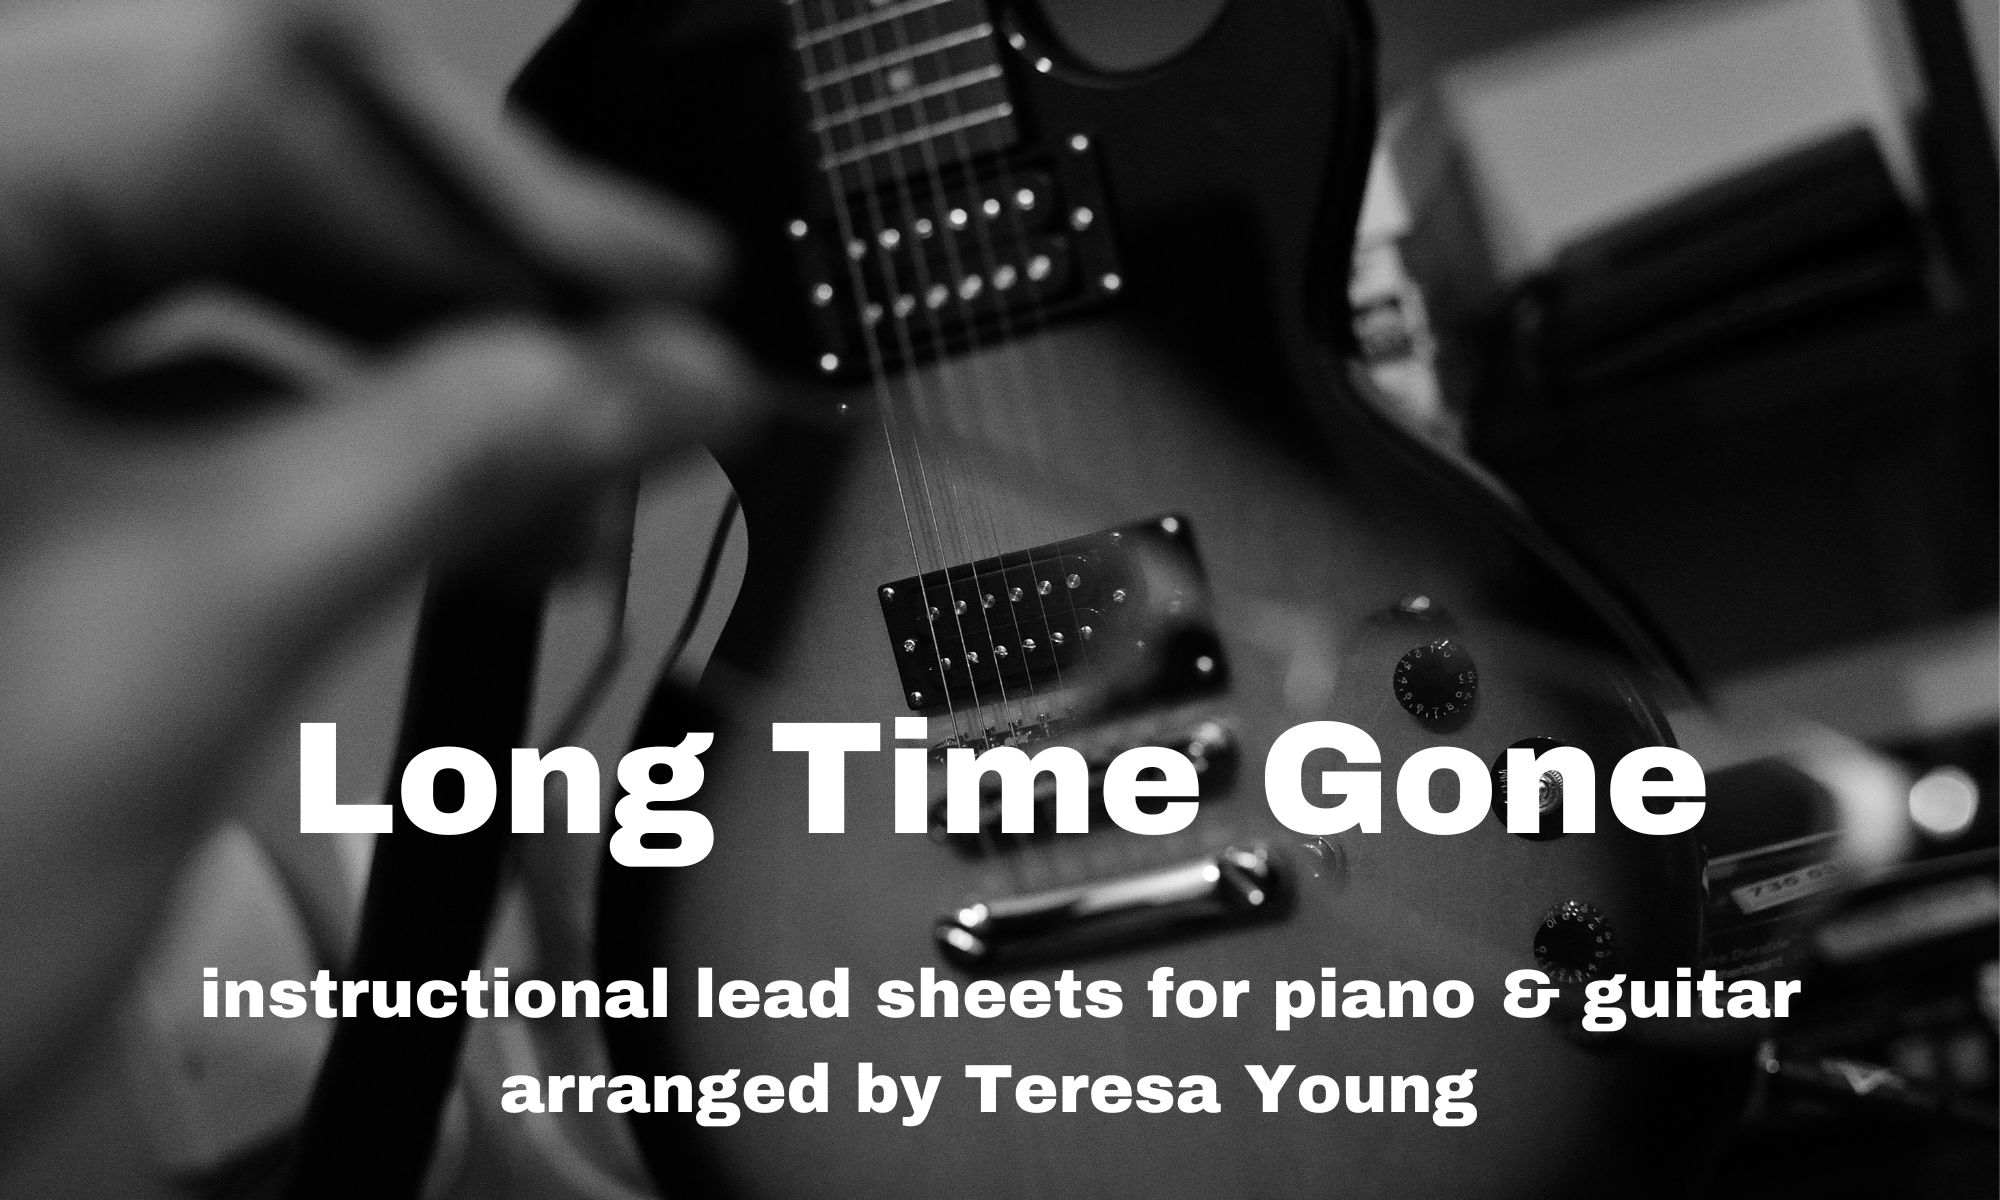 Long Time Gone lead sheets arr. Teresa Young